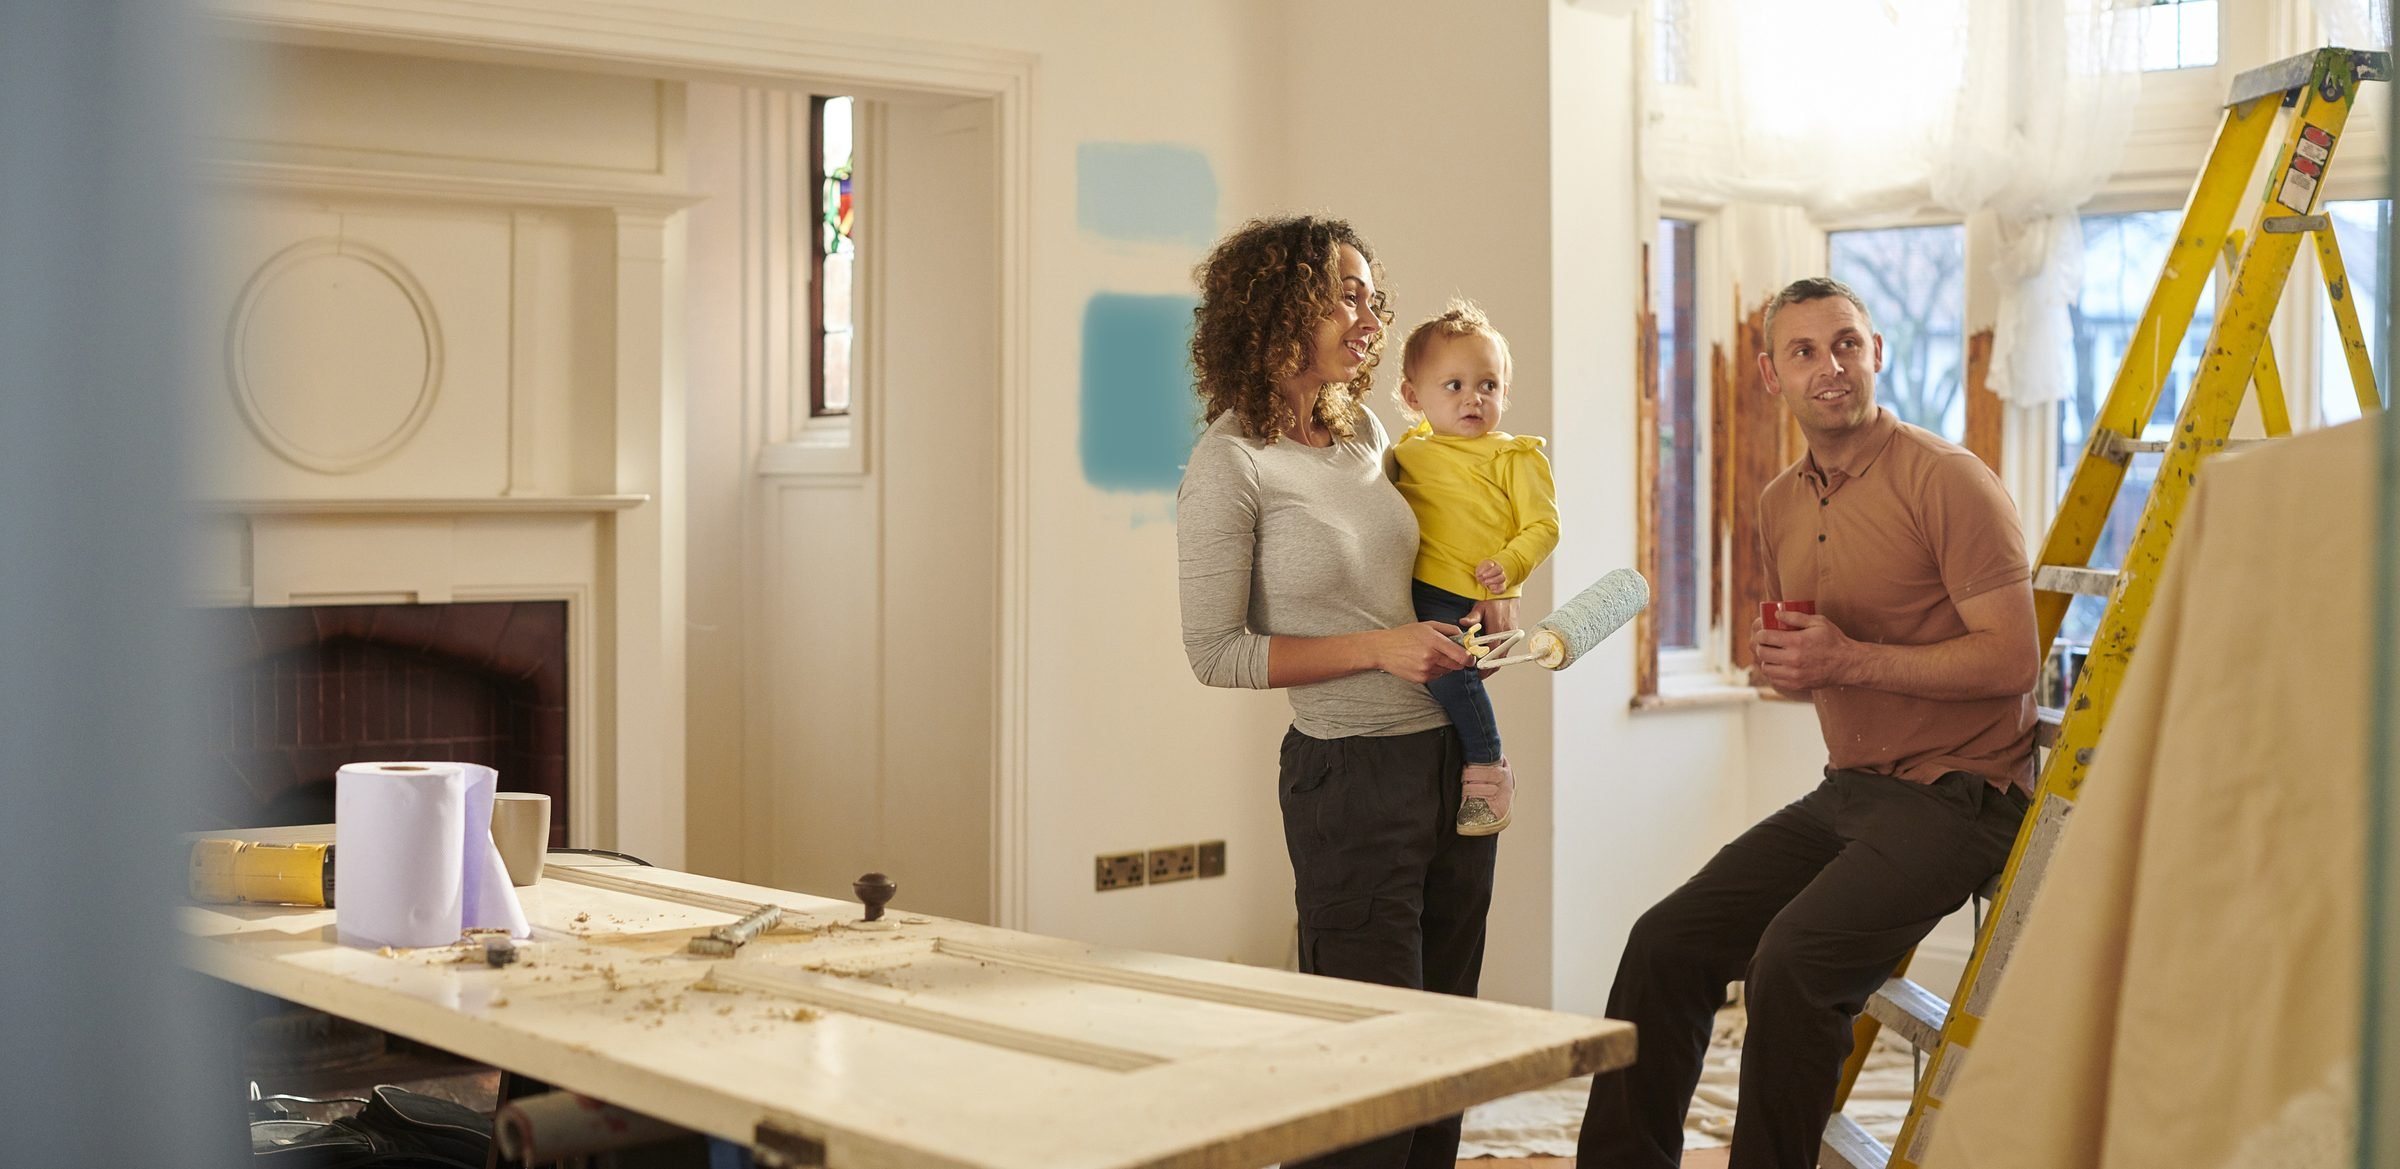 How to Finance a Home Renovation - NerdWallet